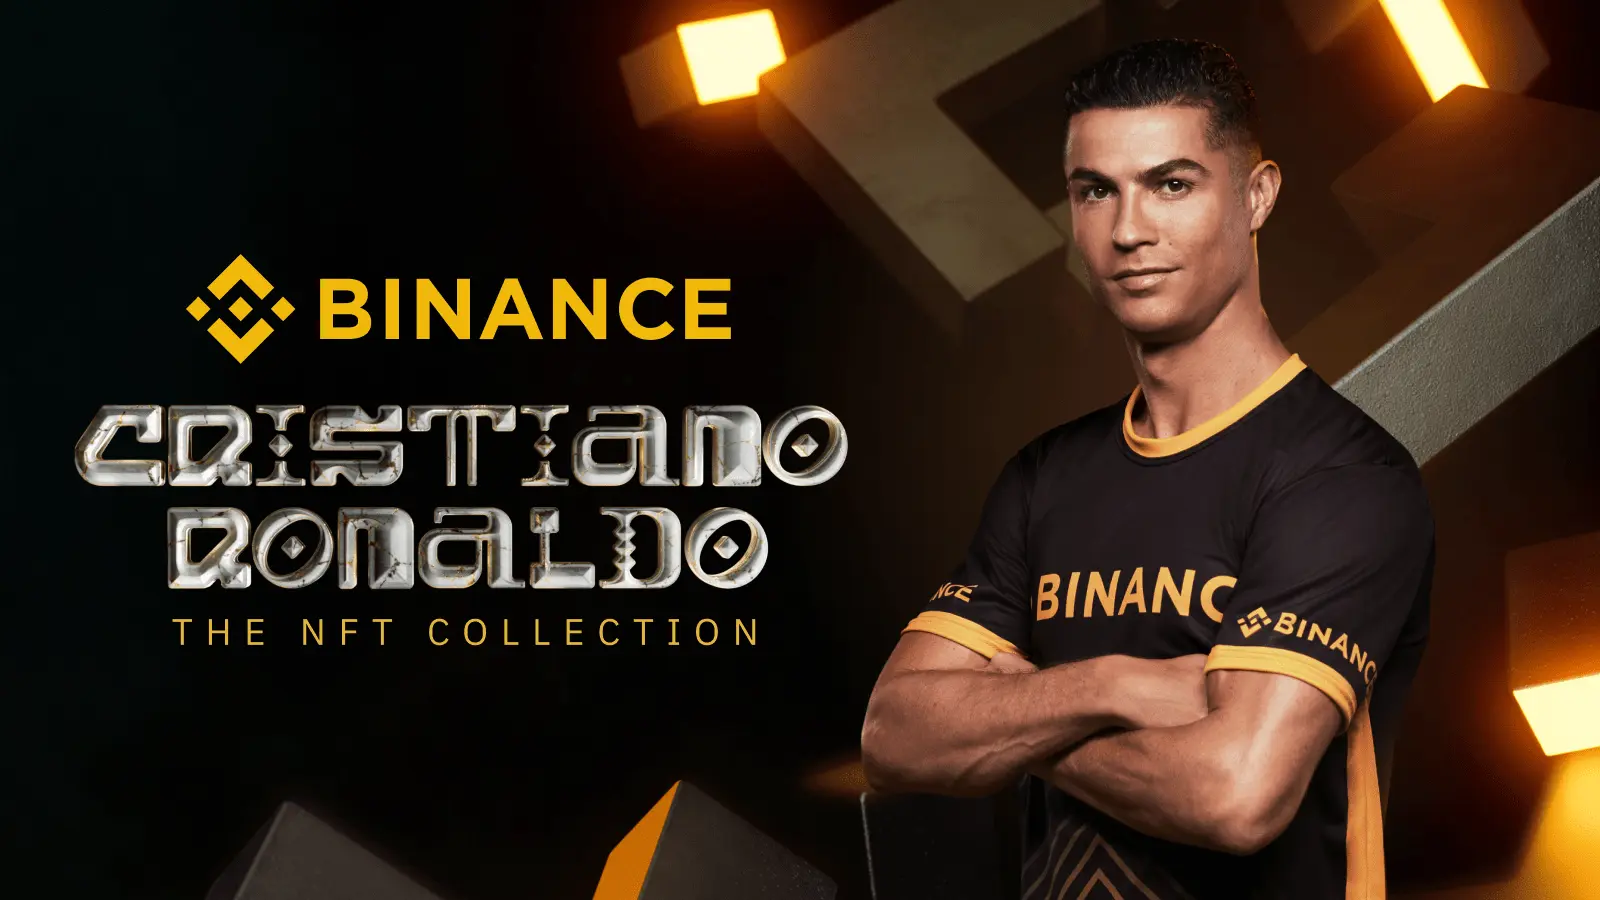 promo banner with christiano ronaldo's portrait, text reads christiano ronaldo the nft collection by binance